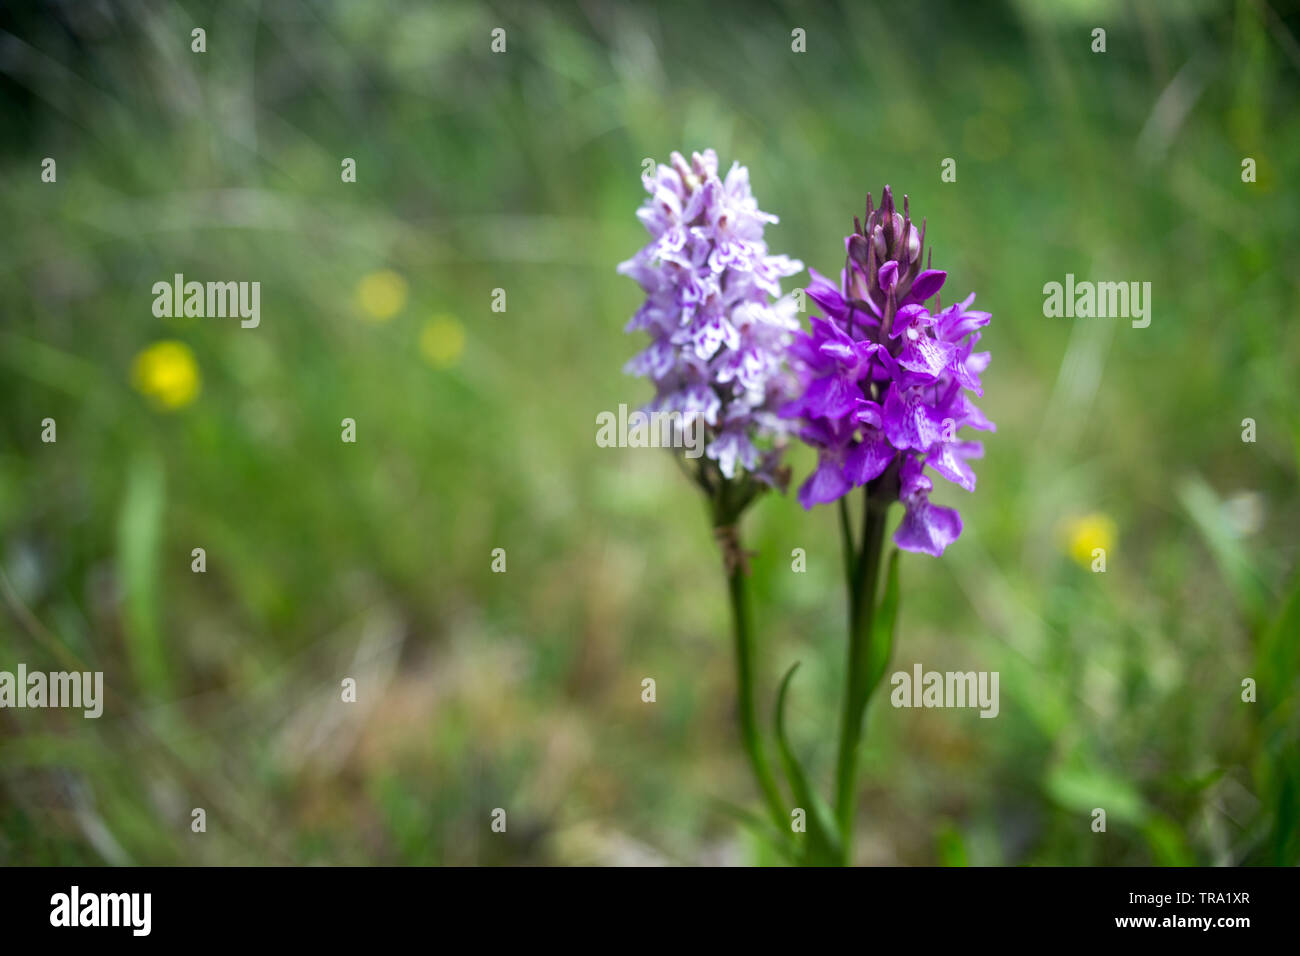 Dactylorhiza maculata (heath spotted orchid) native British ground Orchid growing naturally in nature among a flower meadow during the Spring season Stock Photo